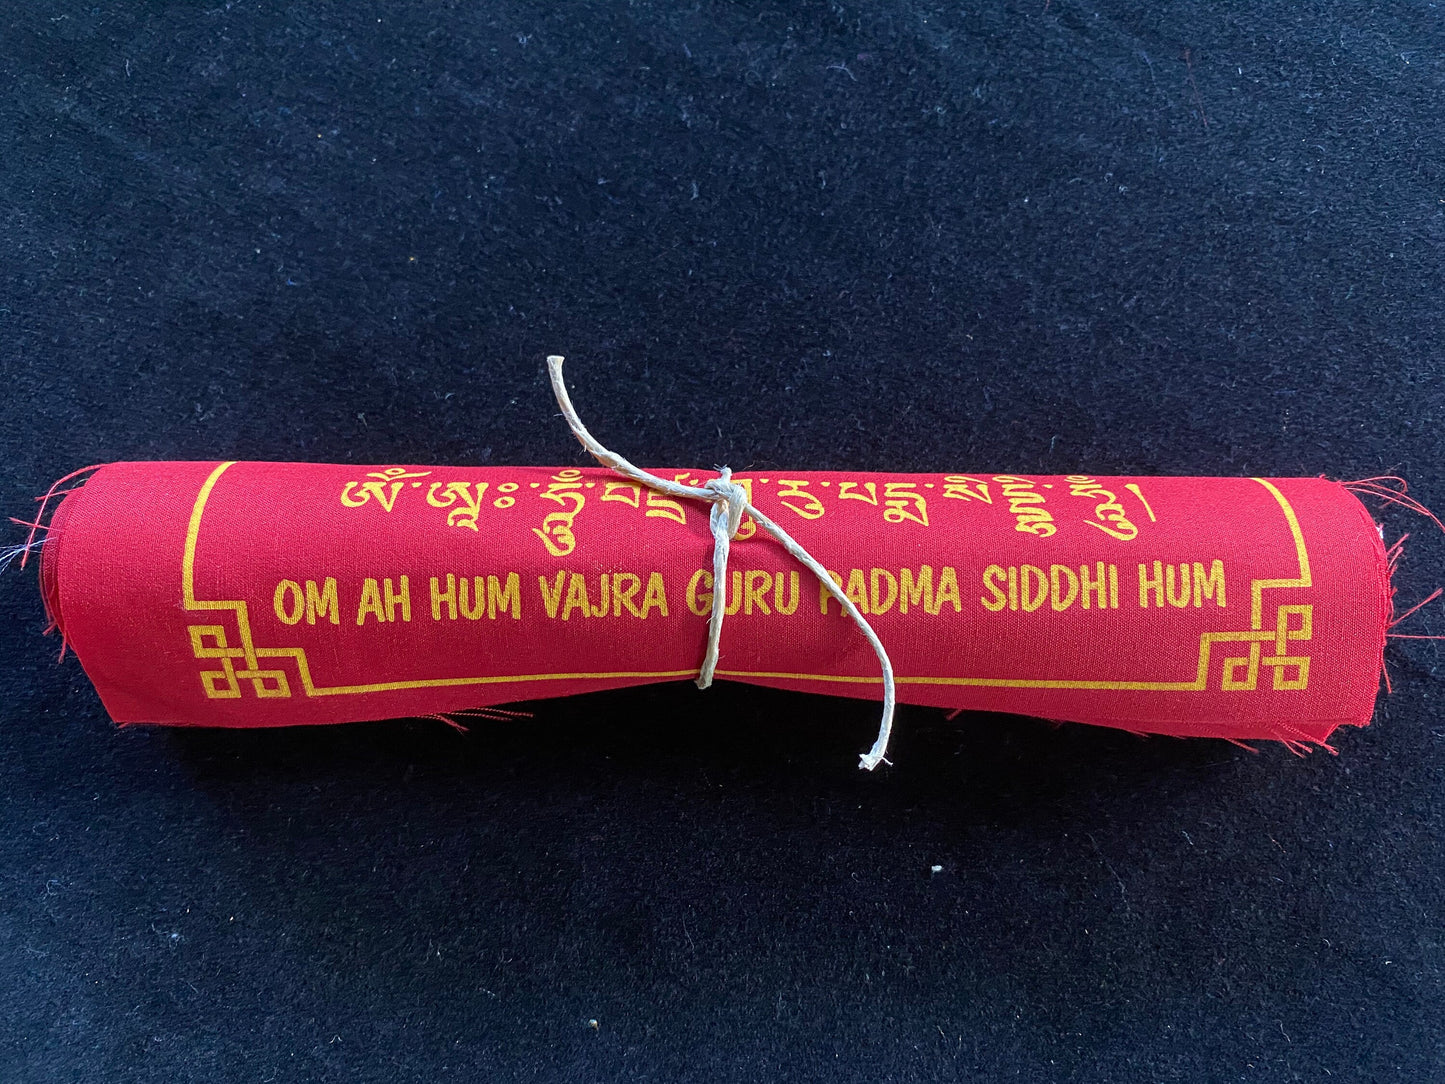 High-quality Tibetan prayer flags: Close-up of 1 rolls of 10 Guru Rinpoche flag sets, 8x8 inches each, colored red, imprinted with his image in yellow ink on a black background.